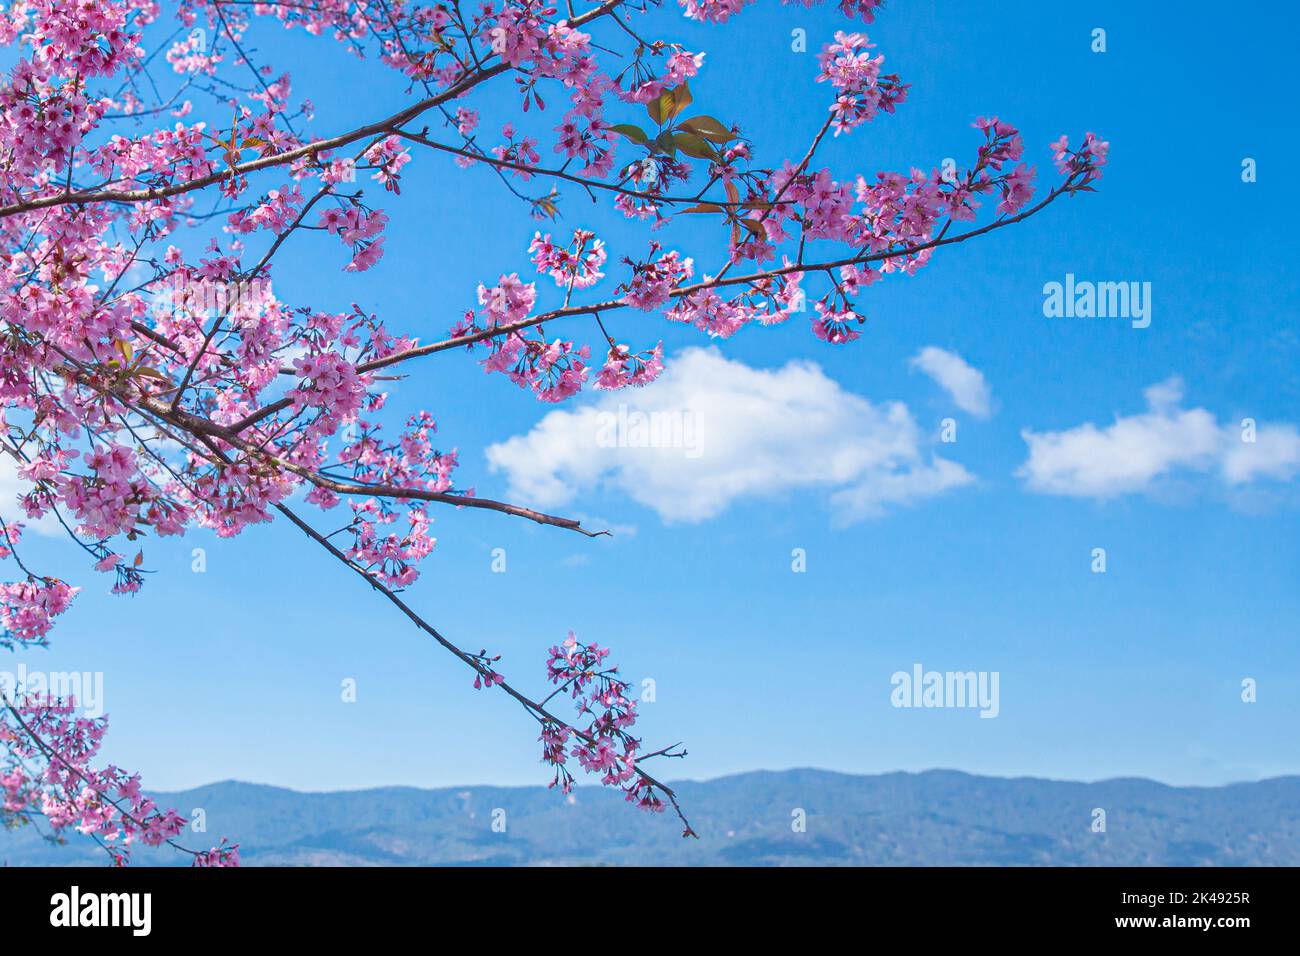 Mai Anh Dao prunus cerasoides flower in blue sky in Lac Duong, Da Lat, Lam Dong, Viet nam, Pink cherry blossoms on the branch with blue sky during spr Stock Photo